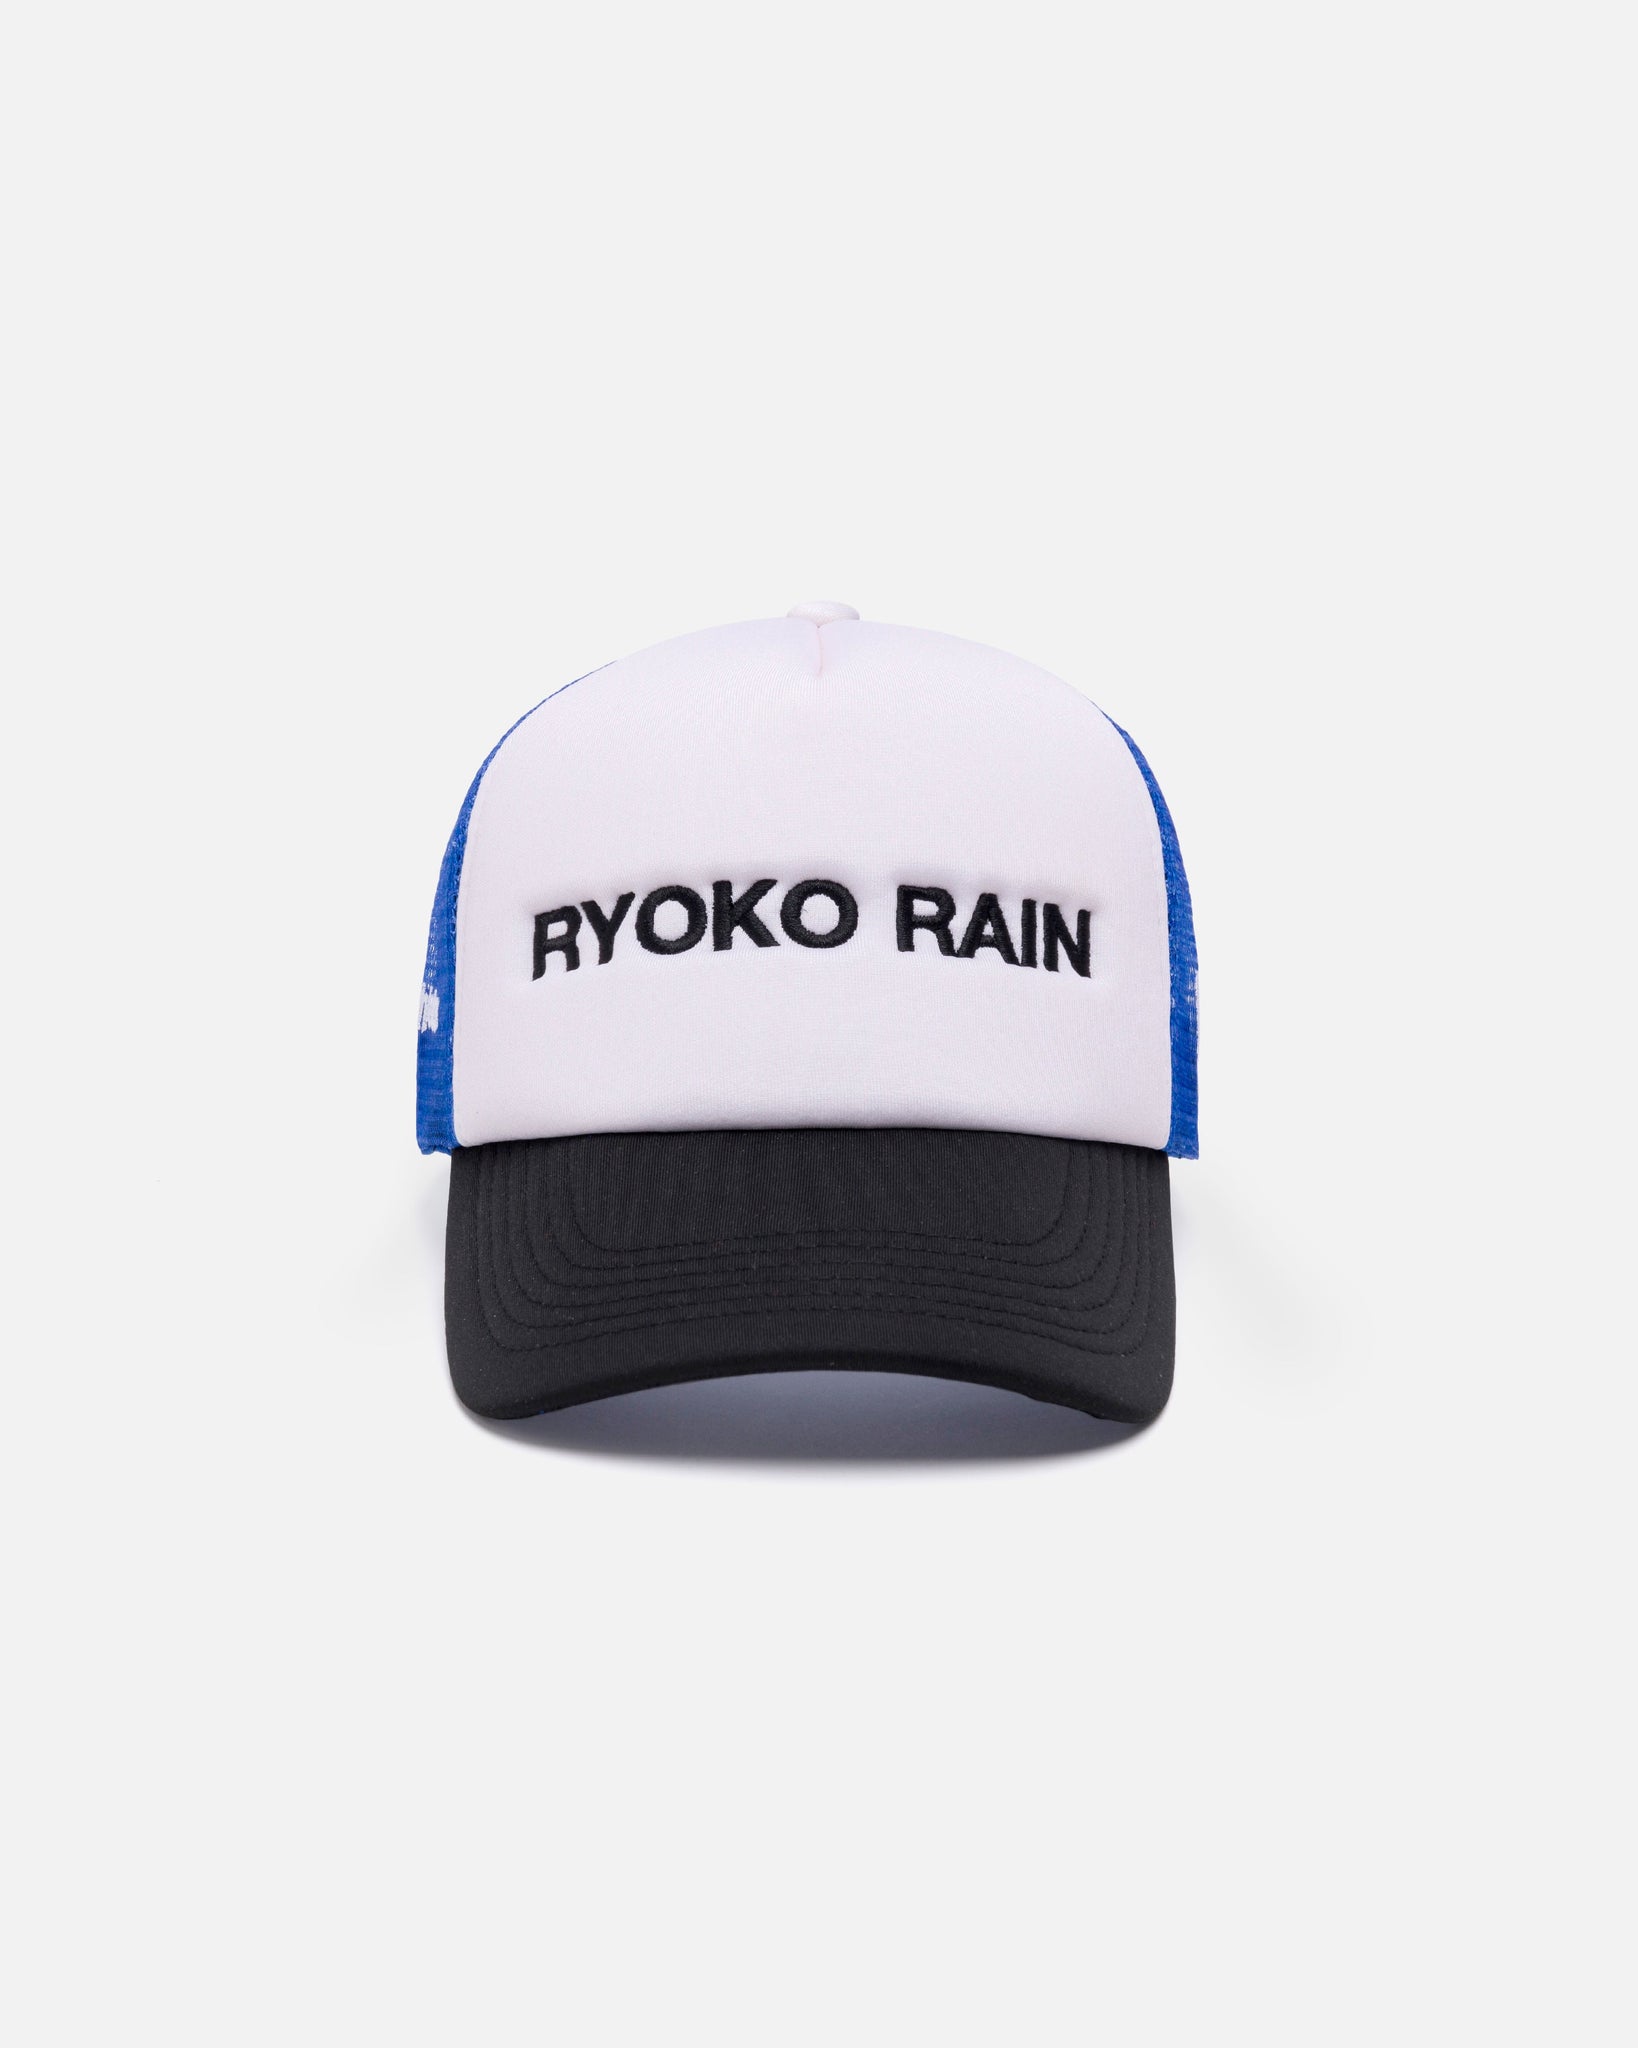 WHITE/BLUE - TIME WILL TELL TRUCKER HATS